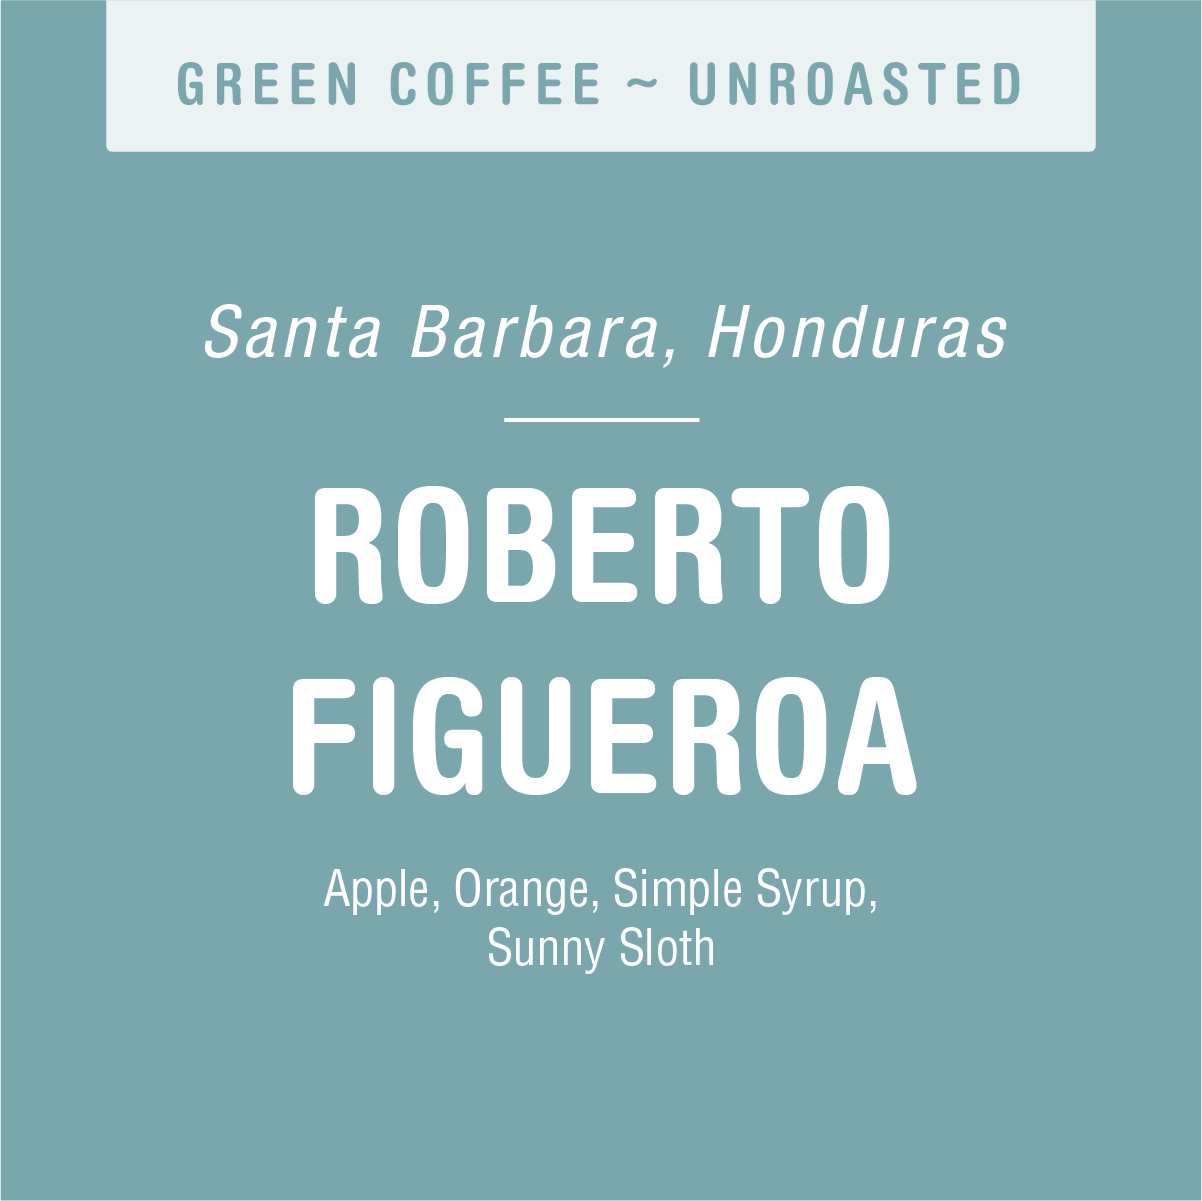 Label for high-quality, green unroasted coffee from Santa Barbara, Honduras, named "Roberto Figueroa (GREEN)" by Tandem Coffee Roasters featuring flavor notes of apple and sunny simple syrup on a teal background.